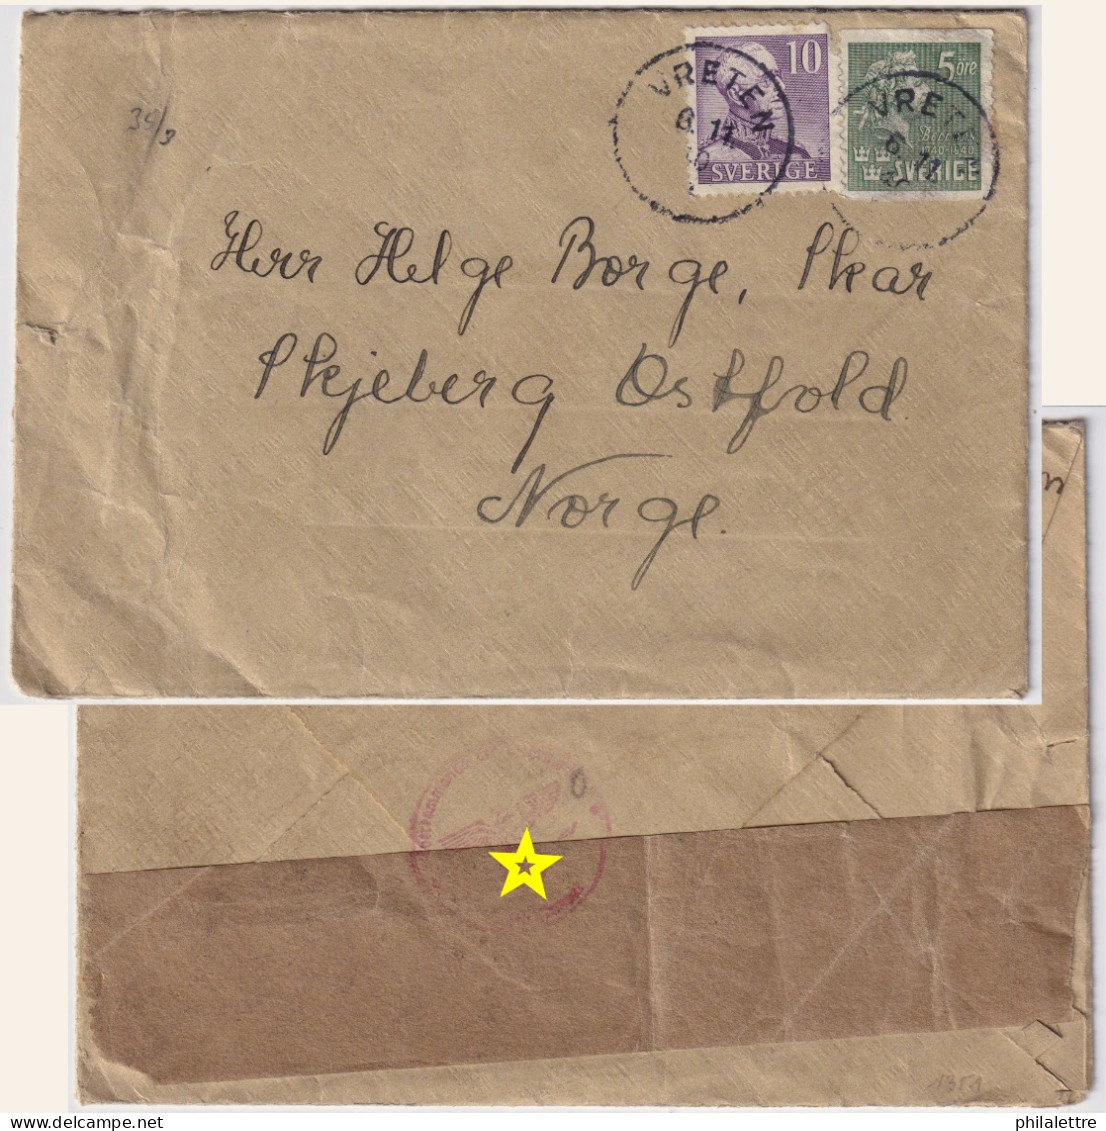 SWEDEN To NORWAY - 1940 - German Censor Tape On Cover From Vreten To Skjeberg - Franked Facit 273C (type II) &324A - Lettres & Documents